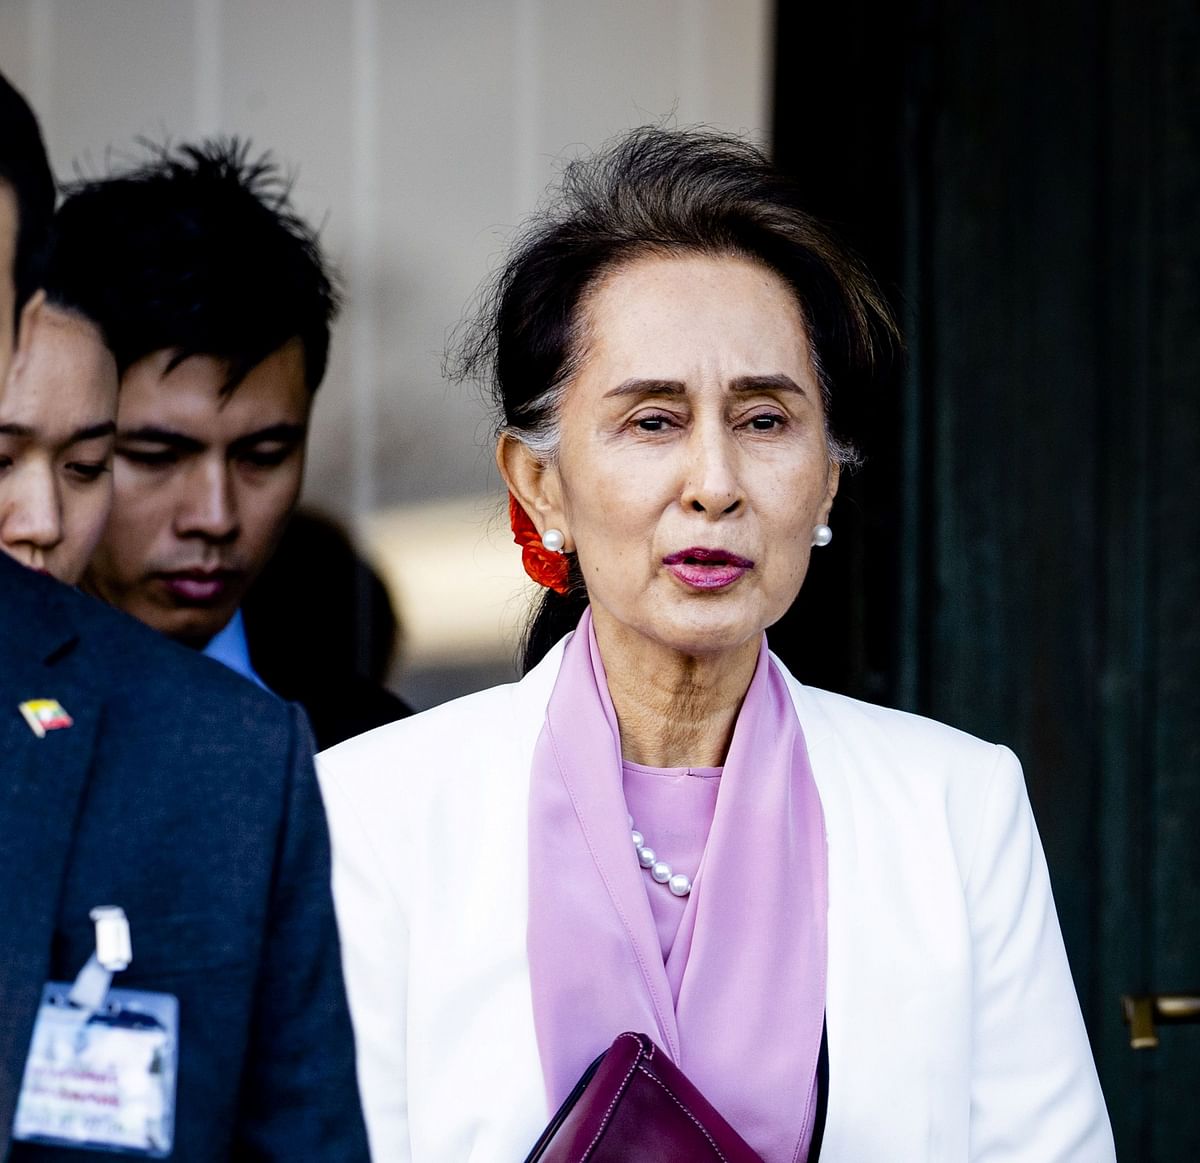 Myanmar`s State Counsellor Aung San Suu Kyi leaves the Peace palace in The Hague, on December 12, 2019 on the the last day of a three-day hearing on the Rohingya genocide case before the UN International Court of Justice. Photo: AFP